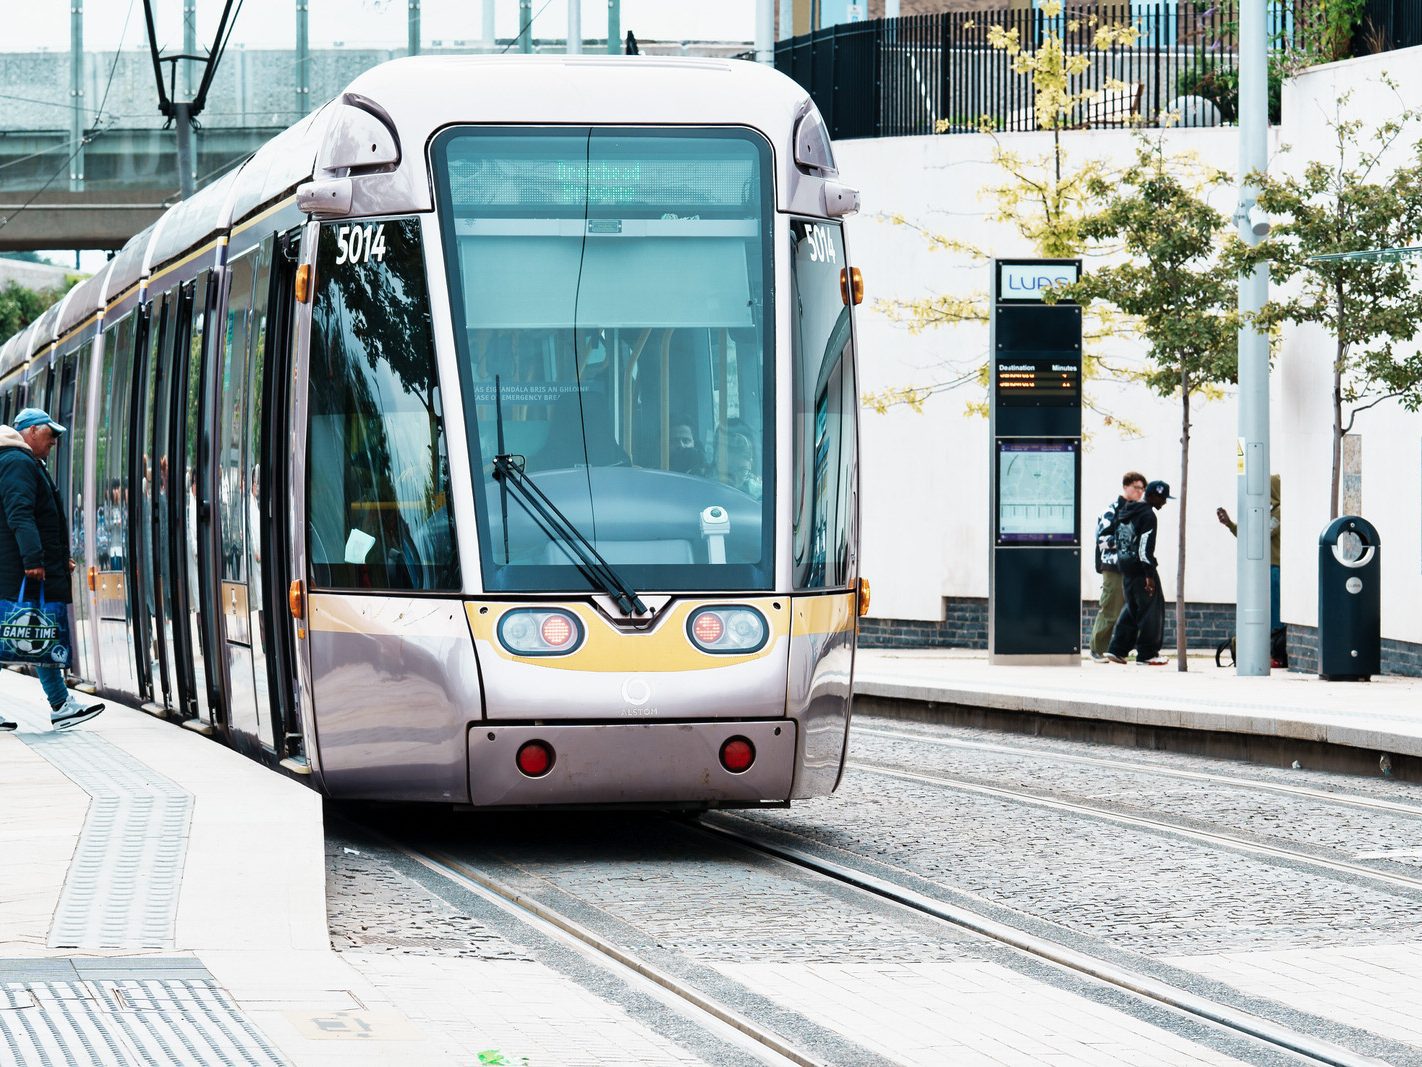 PUBLIC TRANSPORT AT BROADSTONE [RANDOM IMAGES OF LUAS TRAMS ARRIVING AND LEAVING] 013